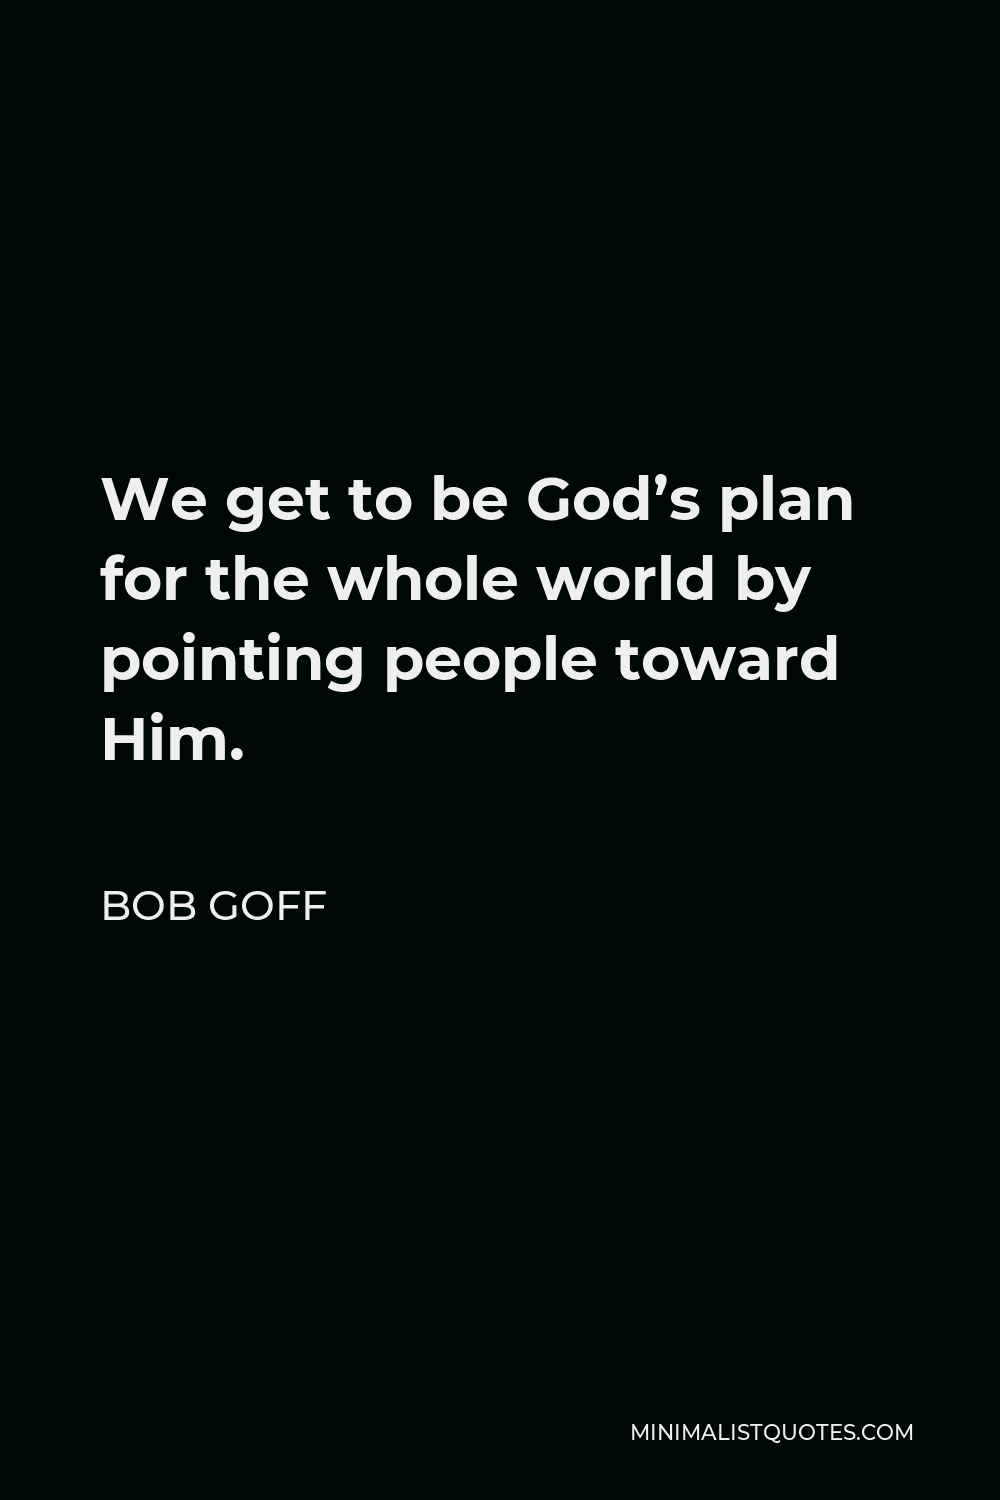 Bob Goff Quote - We get to be God’s plan for the whole world by pointing people toward Him.